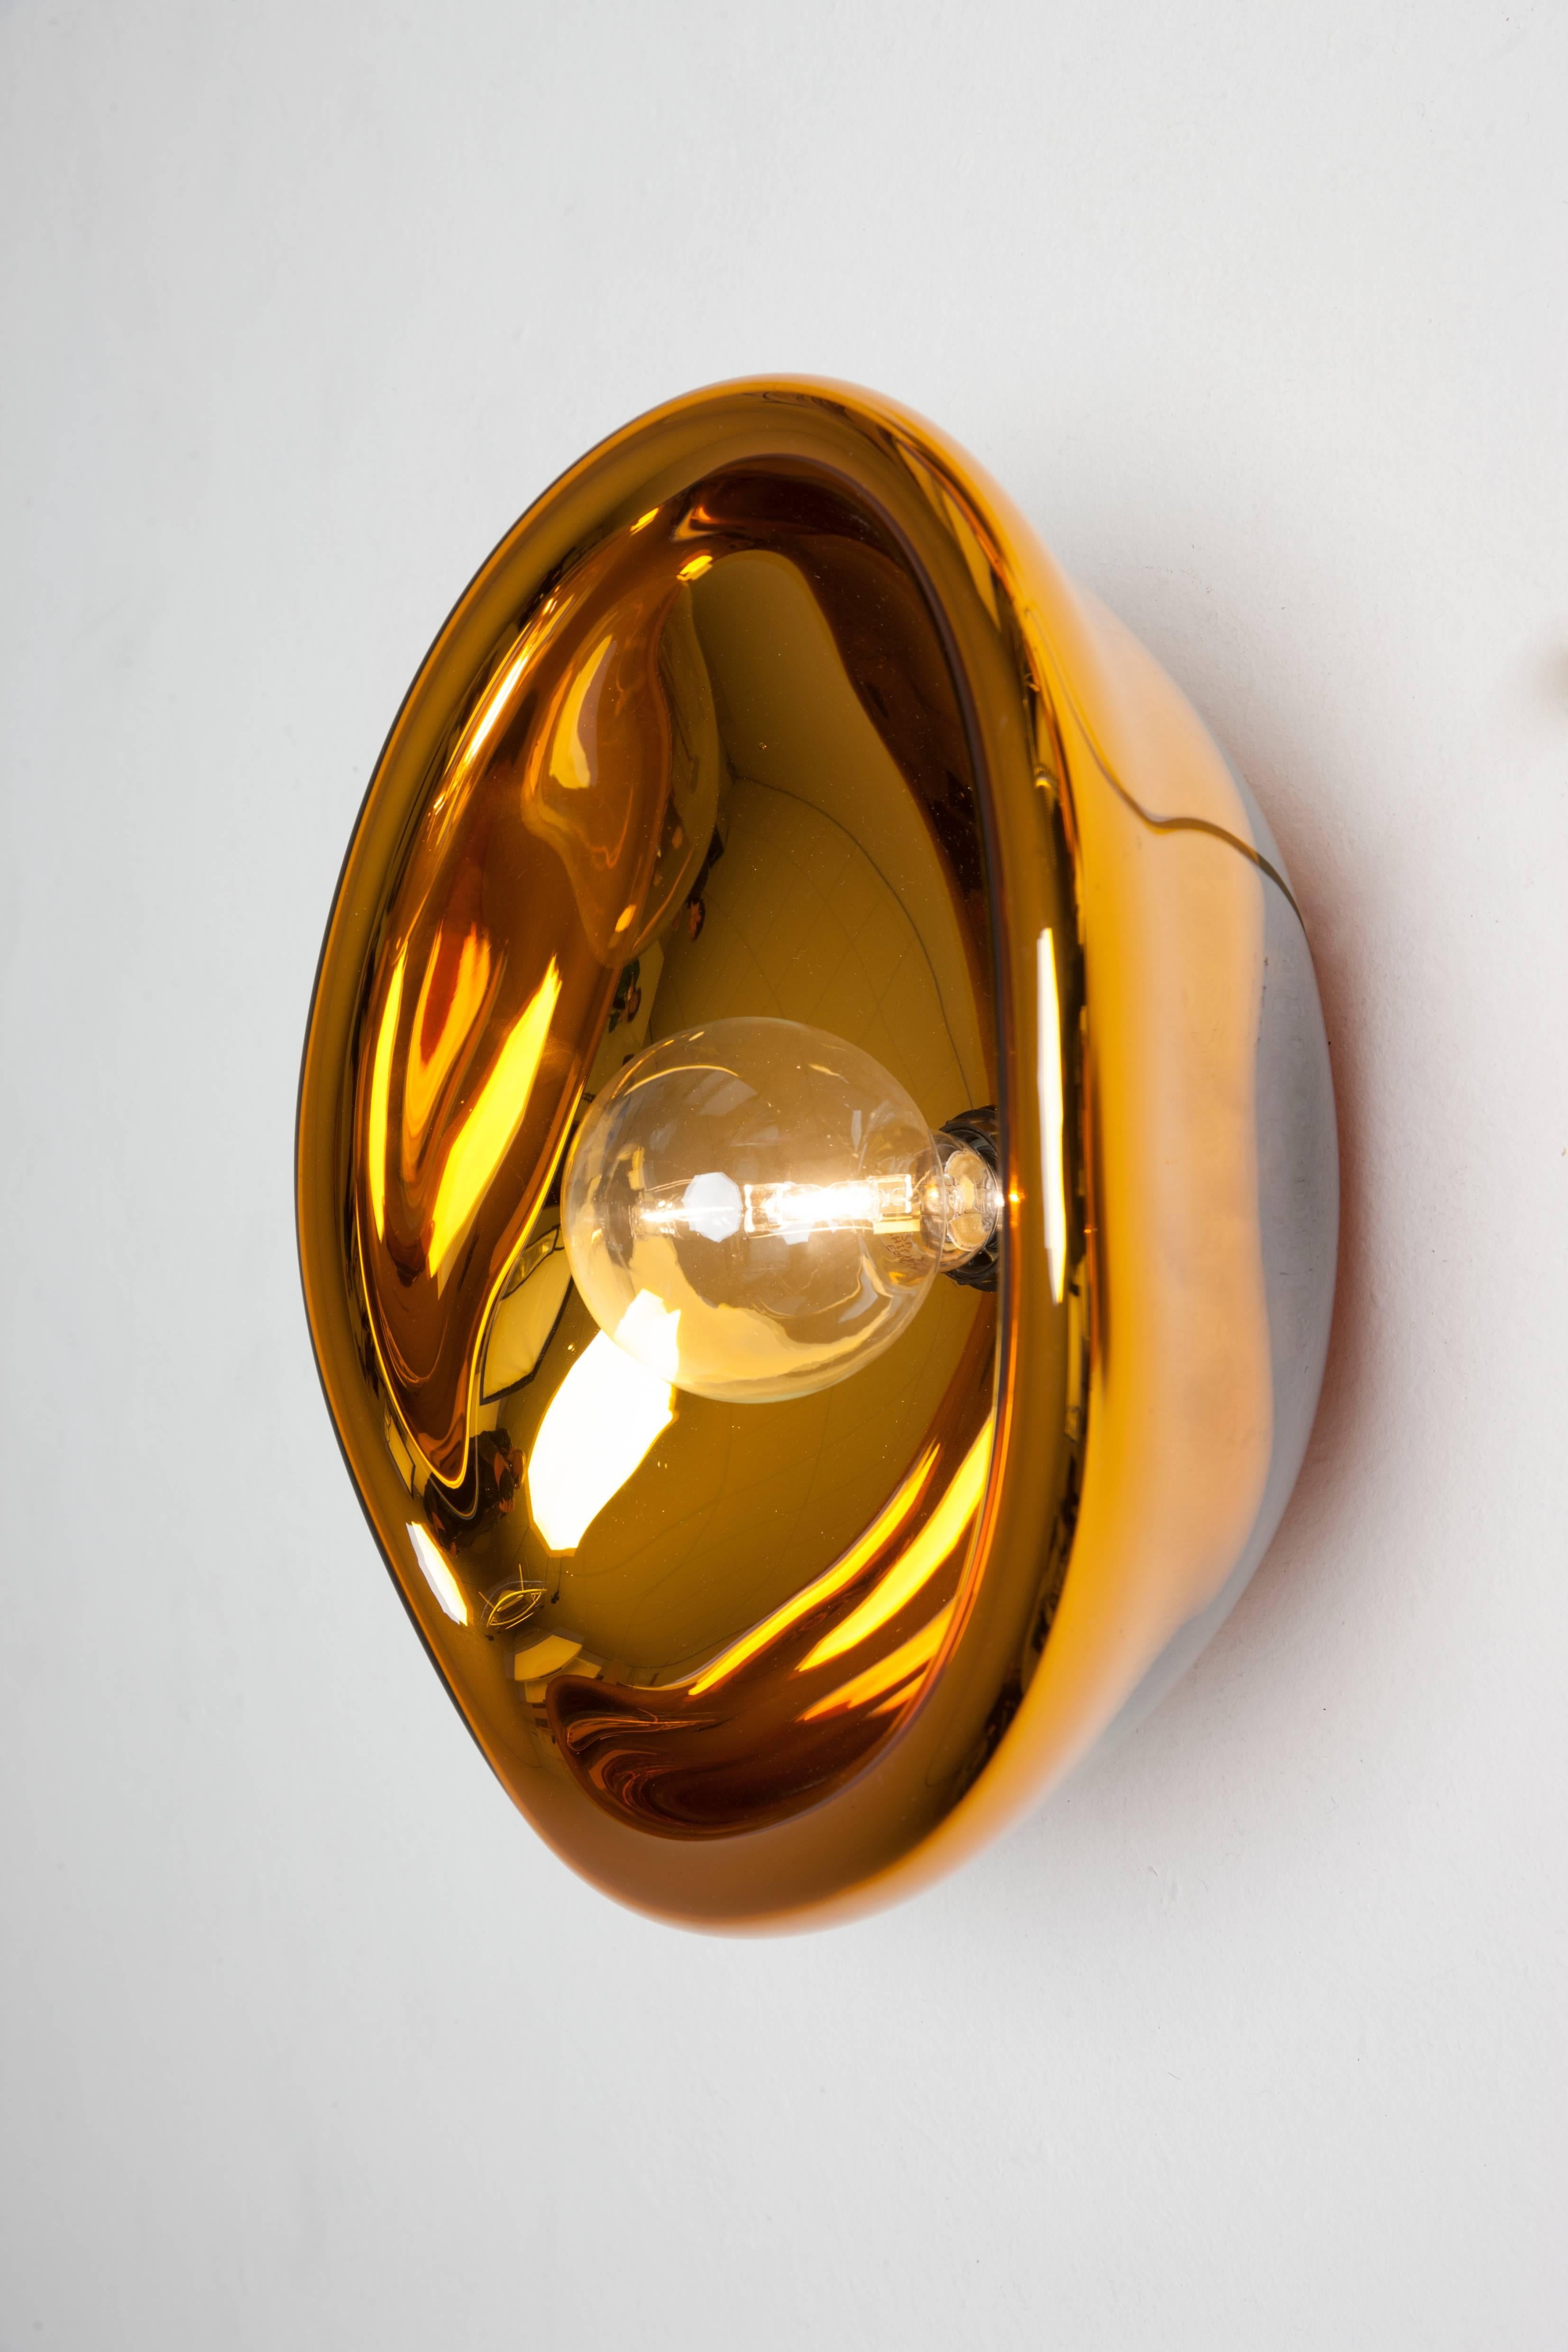 Big Aurum Gold Glass Sconce, Alex de Witte
Gold Big Sconce
Dimensions: 30 x 40 

Aurum shows how Alex de Wite is able to convey movement within a frozen form. As glass is liquid and filled with air while producing, he has captured different shapes